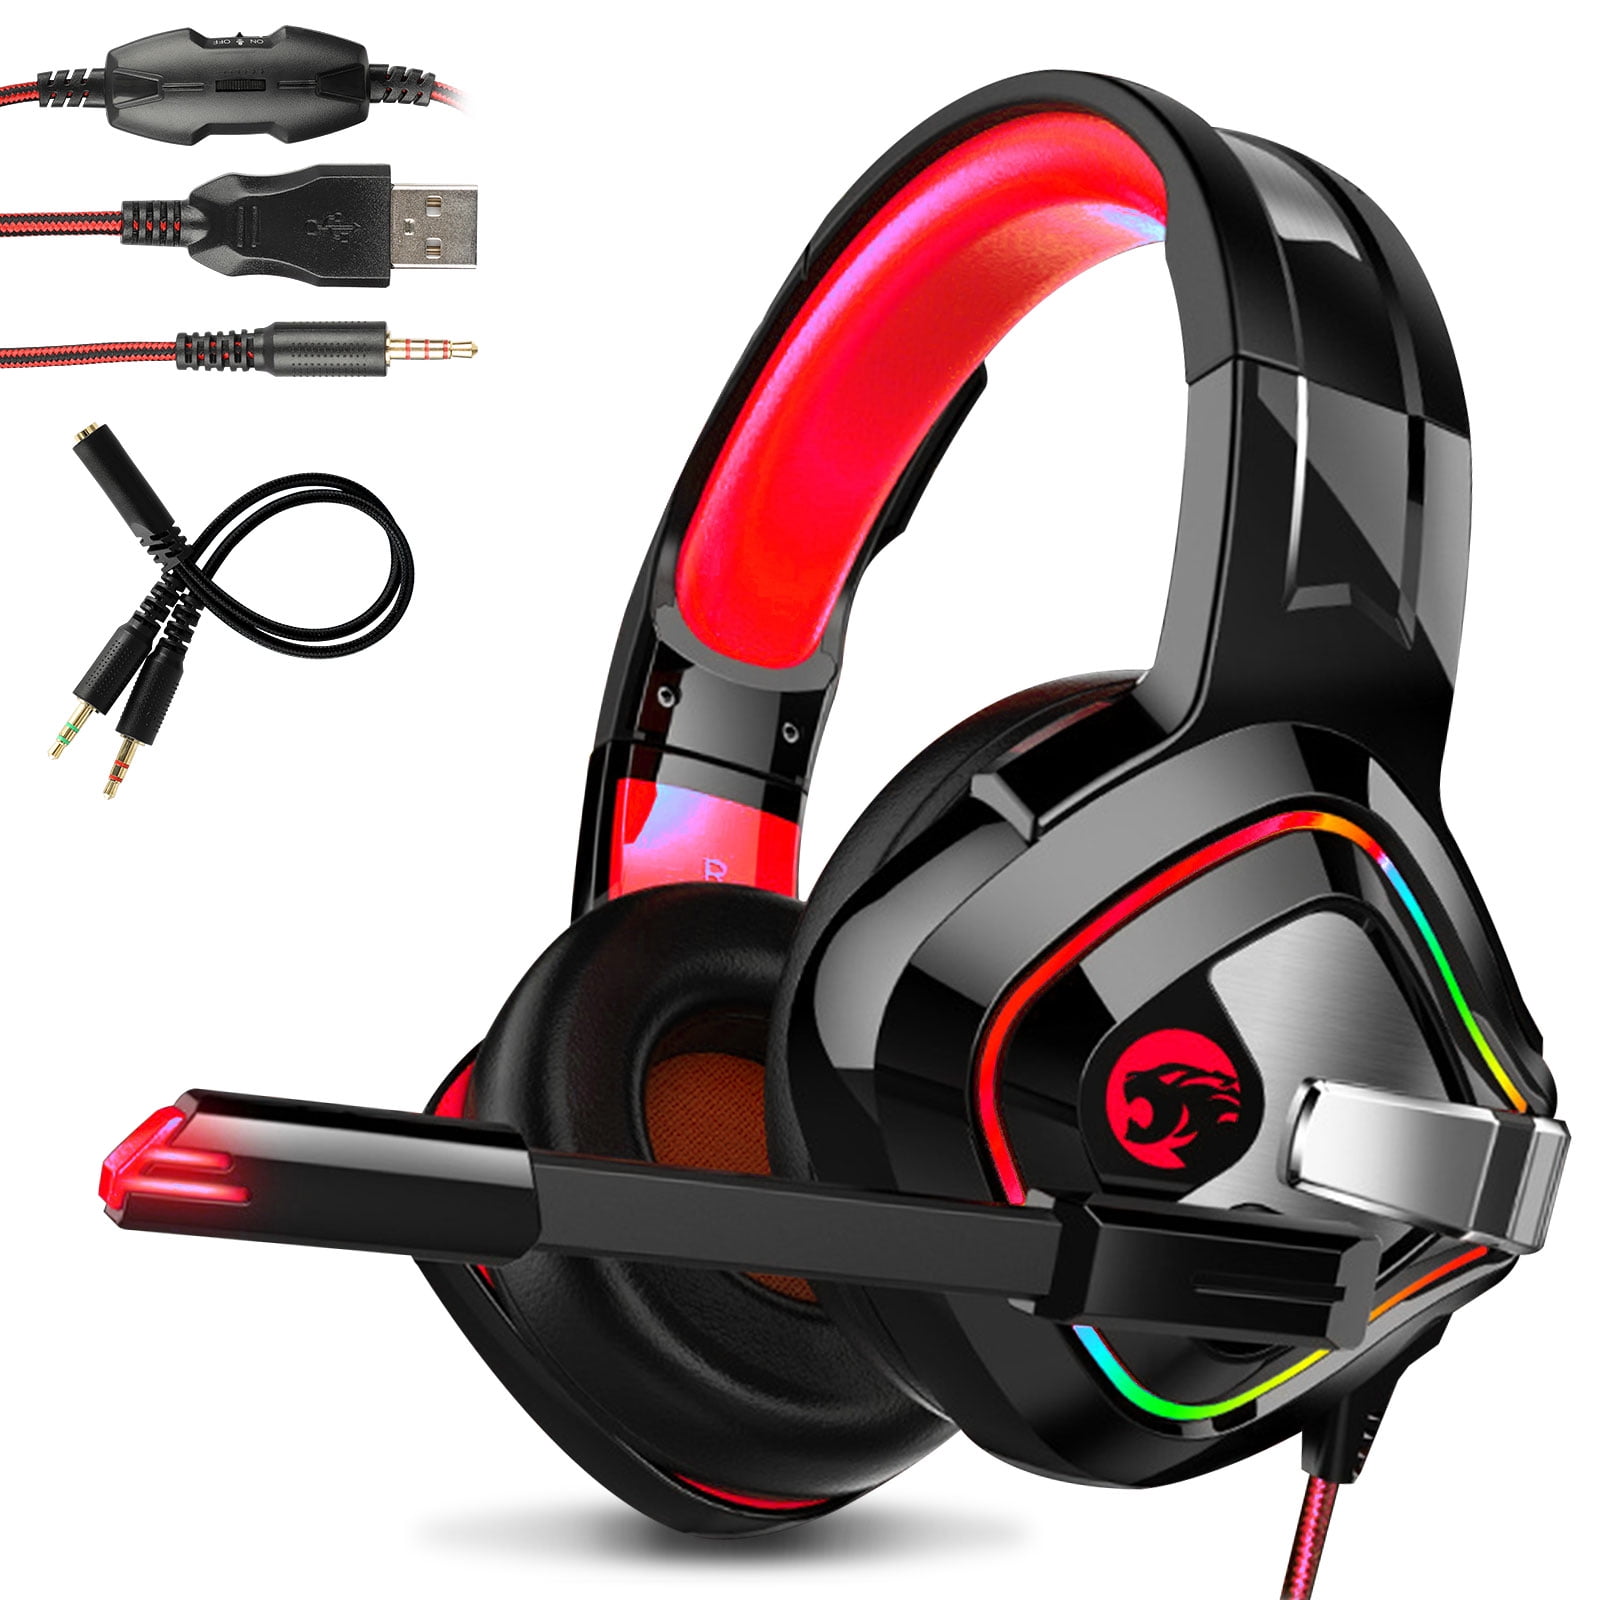 EEEKit Gaming Headset for PS4, Xbox One, PC Headset w/ Surround Sound, Noise Canceling Over Ear Headphones with Mic & LED Light, Compatible with Nintendo Switch, PS3, Mac, Laptop